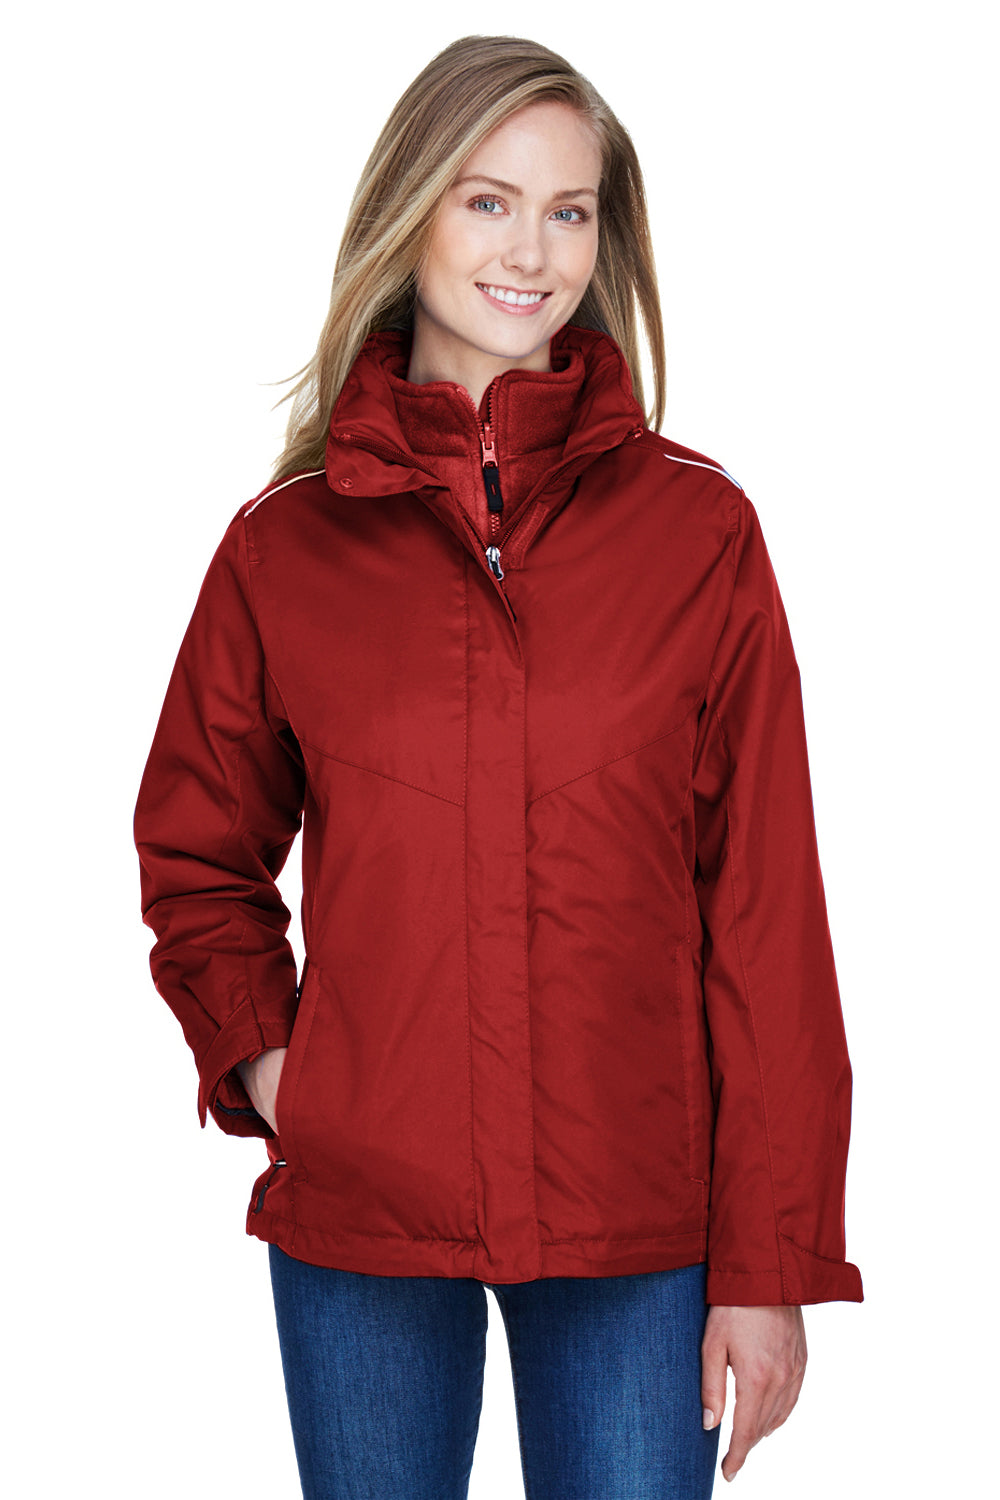 Core 365 78205 Womens Region 3-in-1 Water Resistant Full Zip Hooded Jacket Red Front